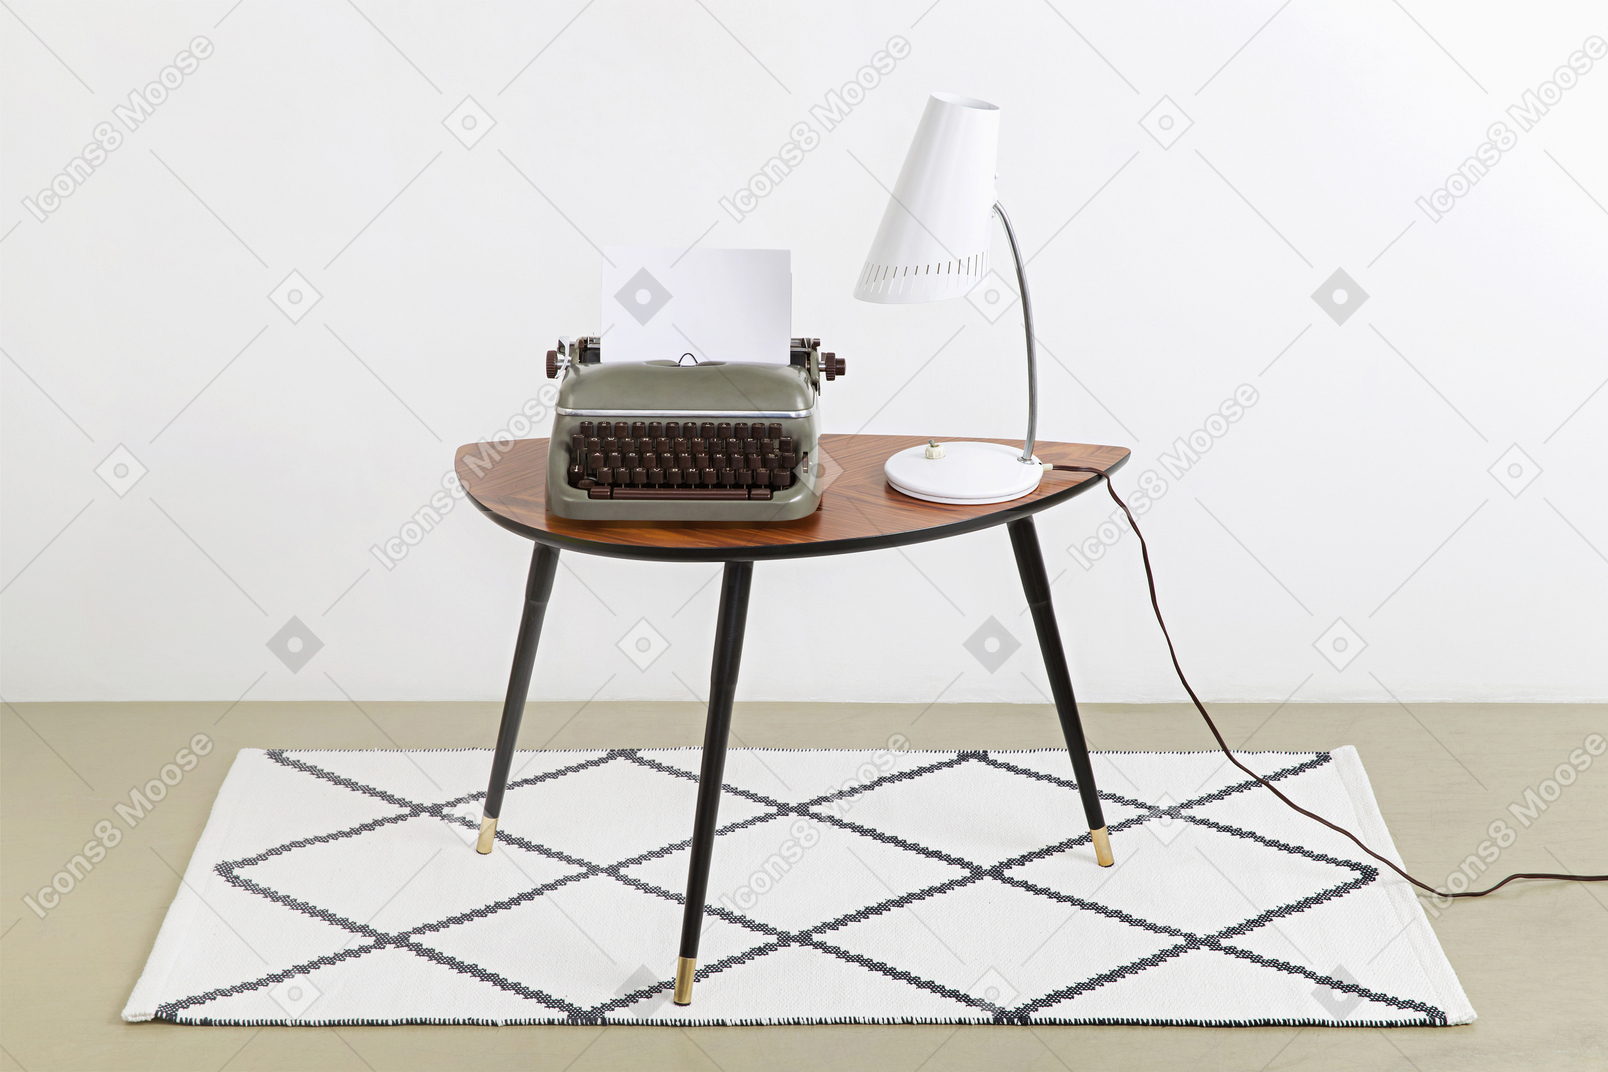 A typewriter and a table lamp on a retro table